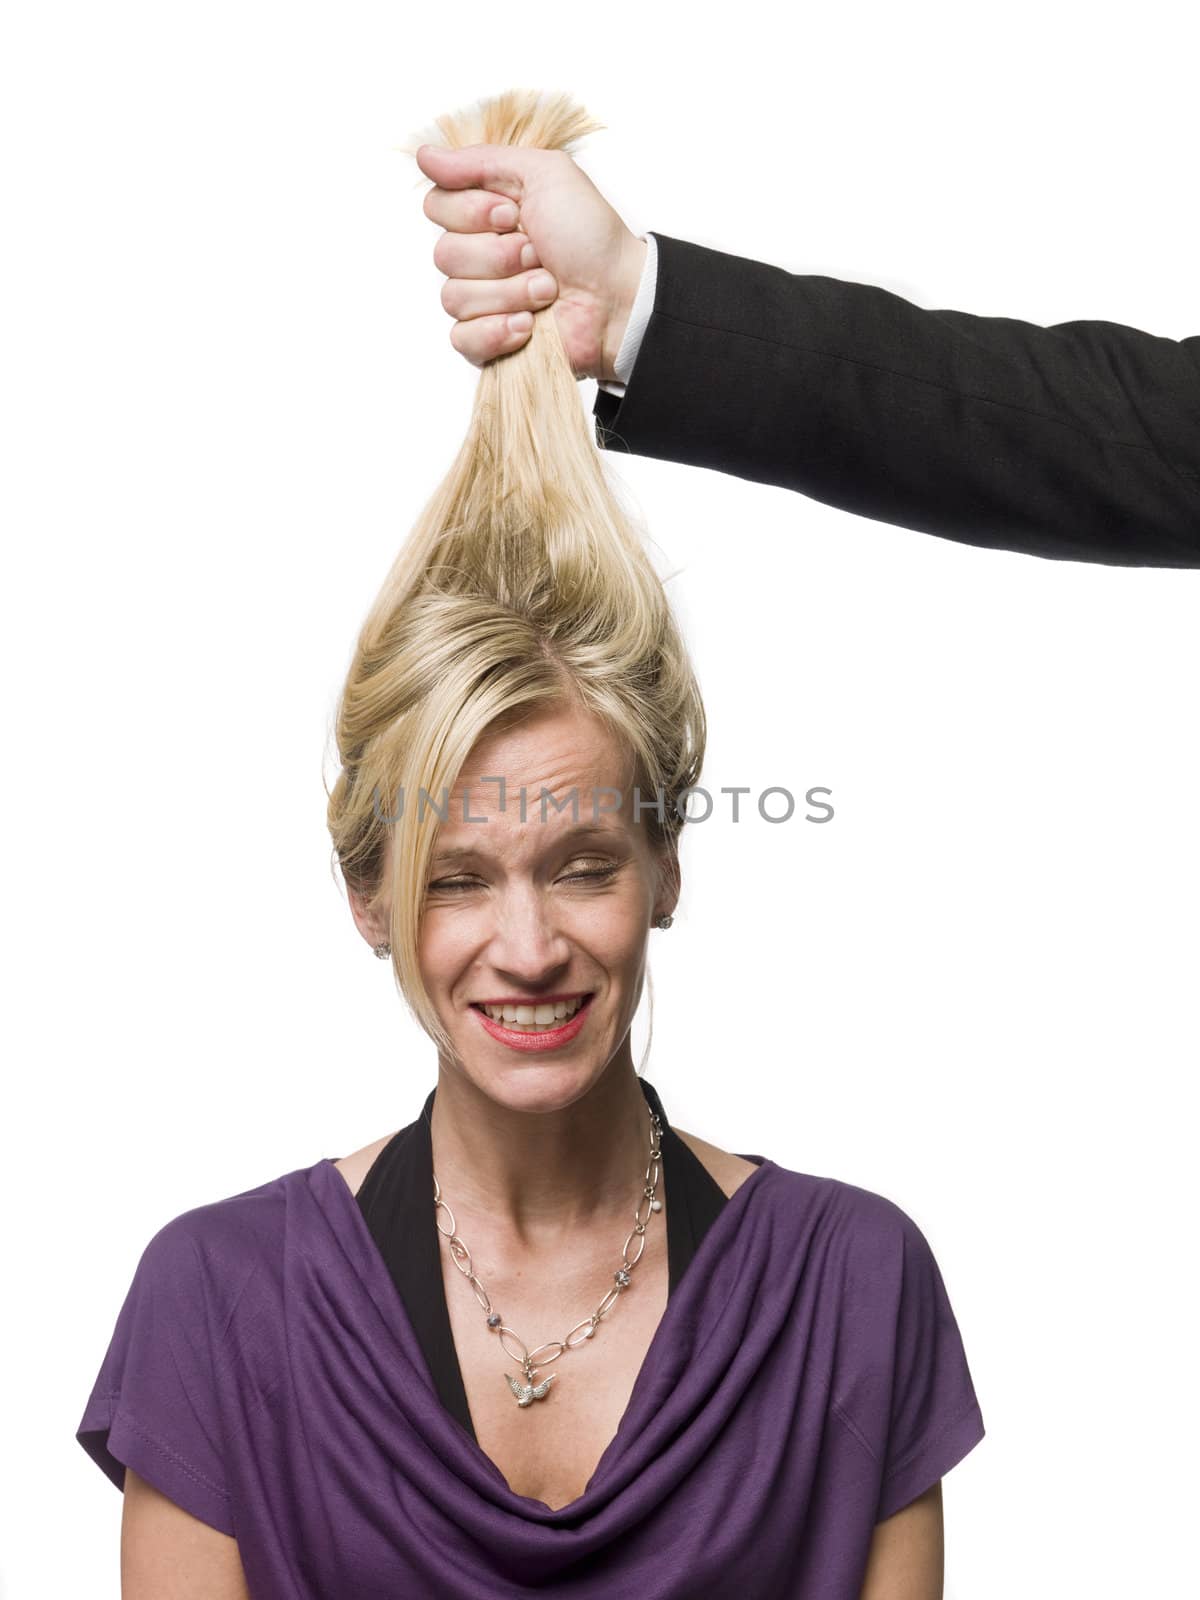 Man pulling a woman in the hair by gemenacom